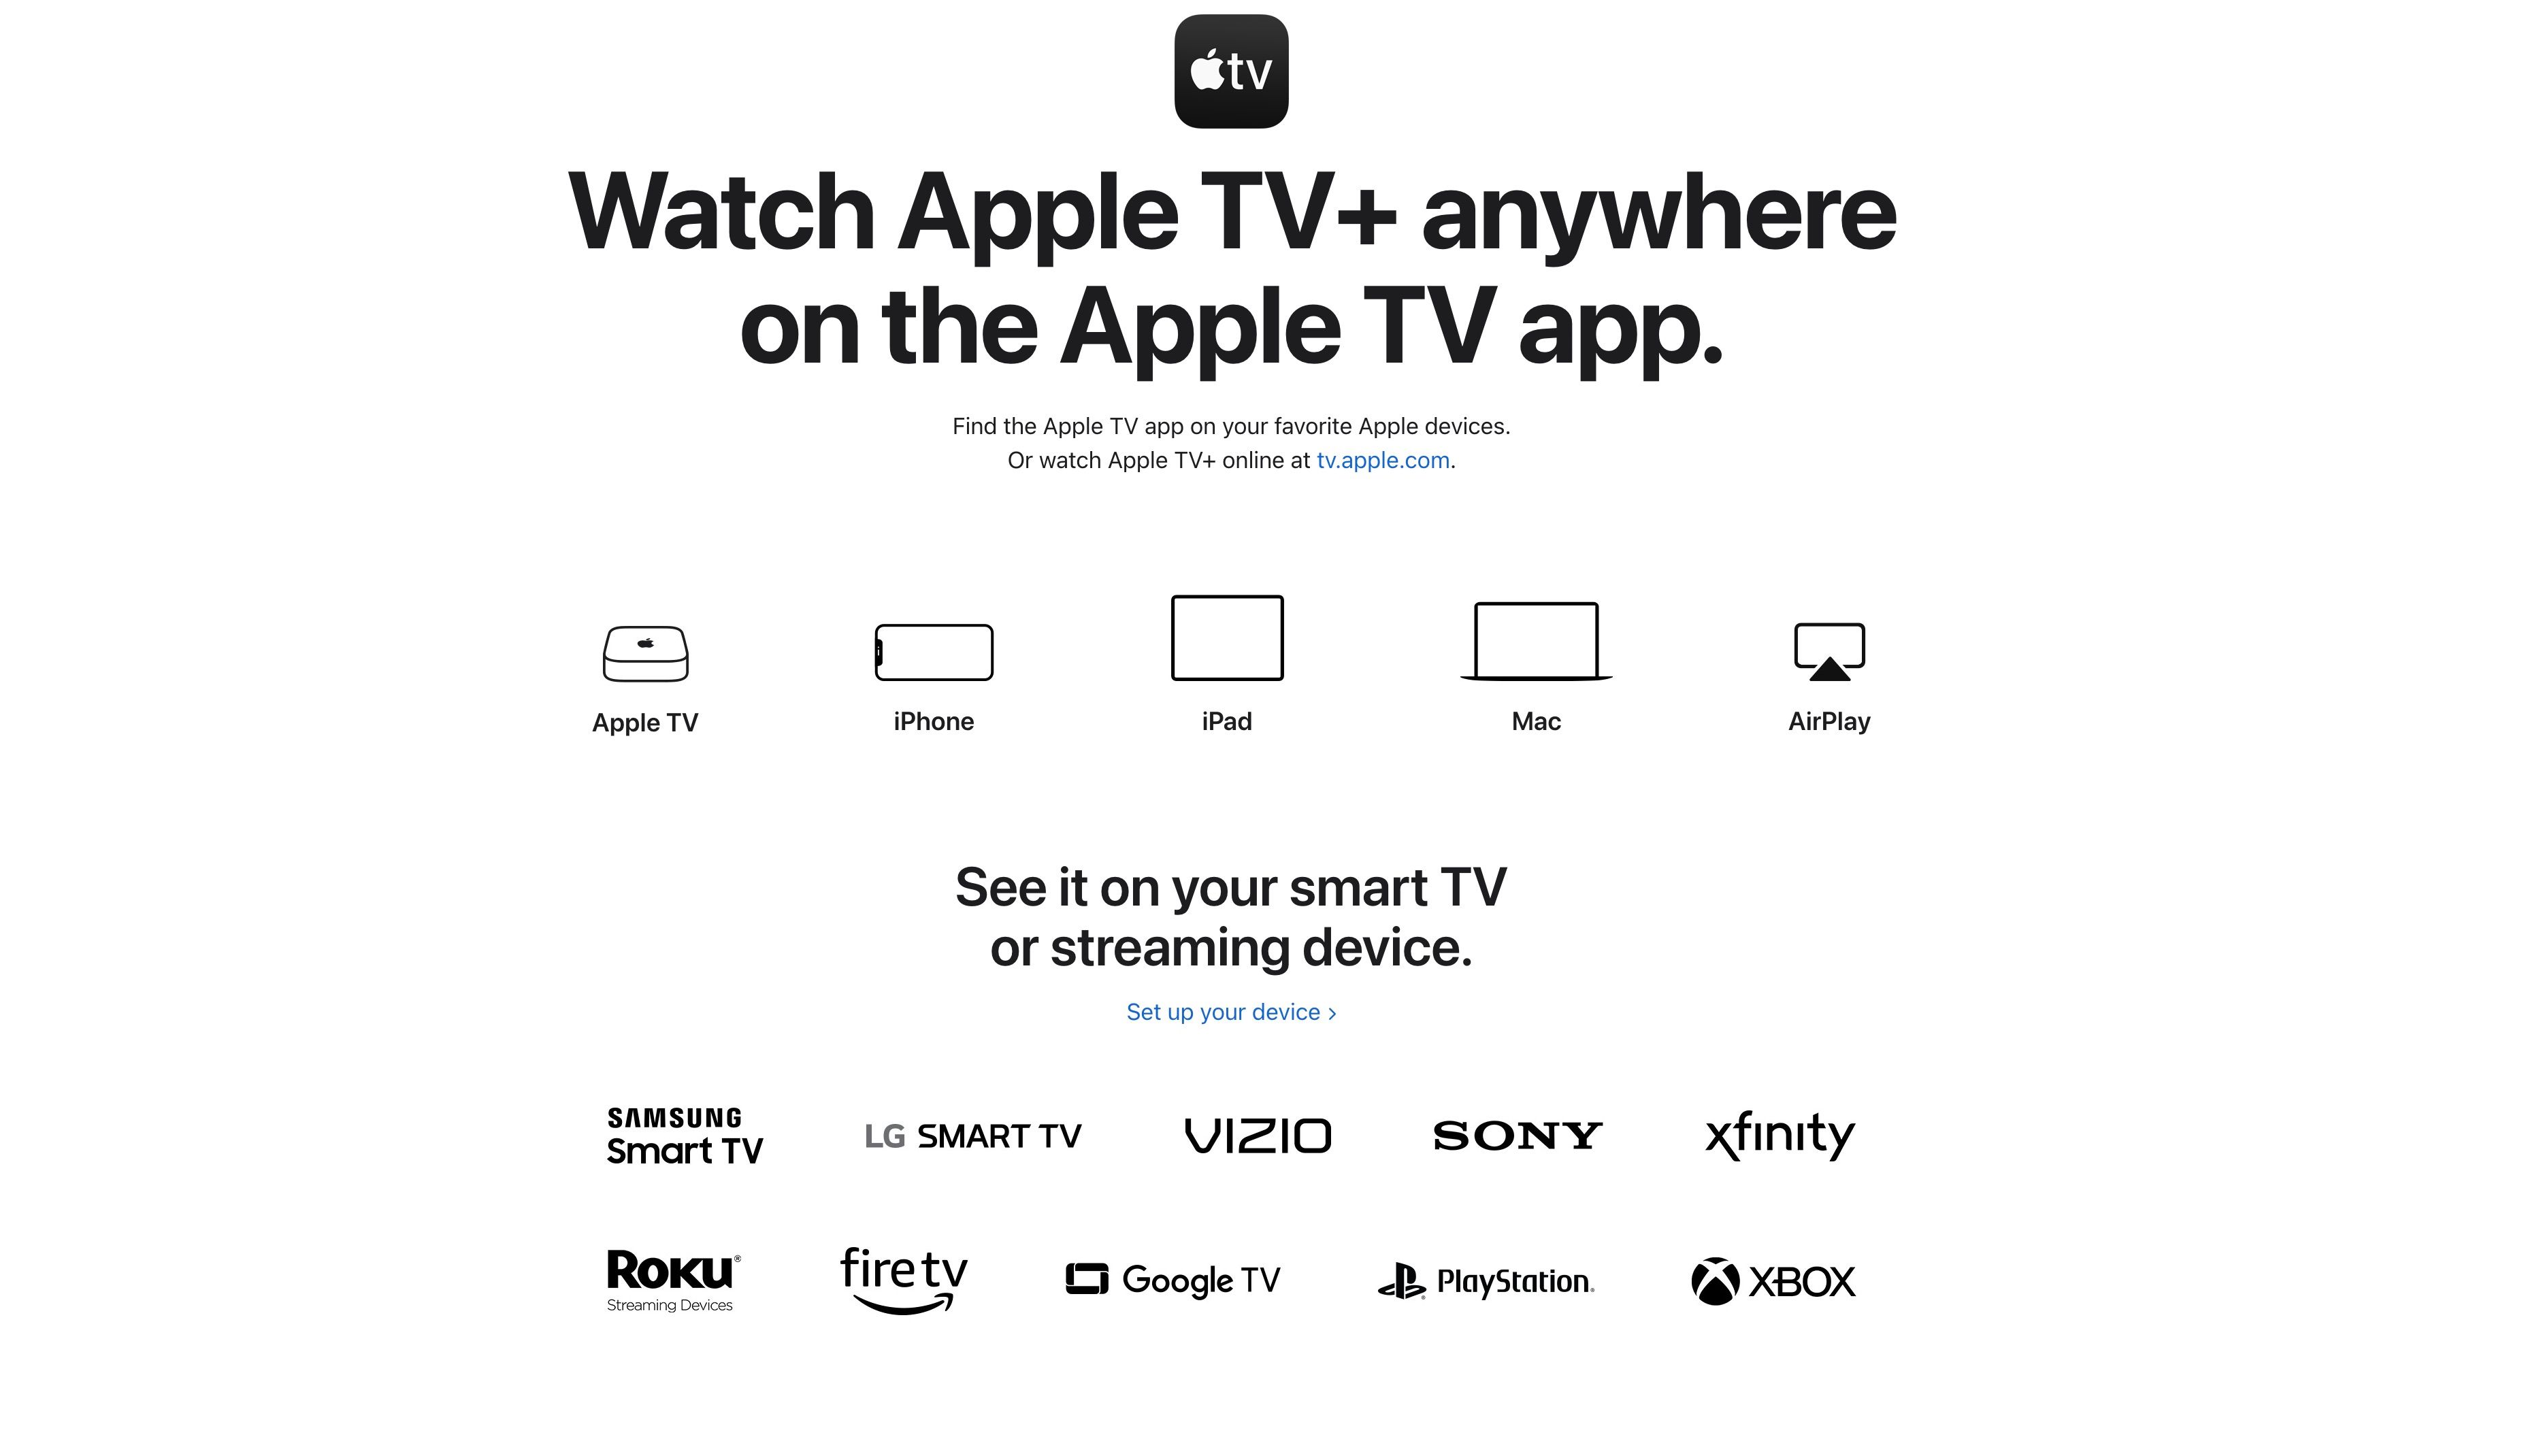 Apple TV+ Supported devices with list of TVs and Apple products